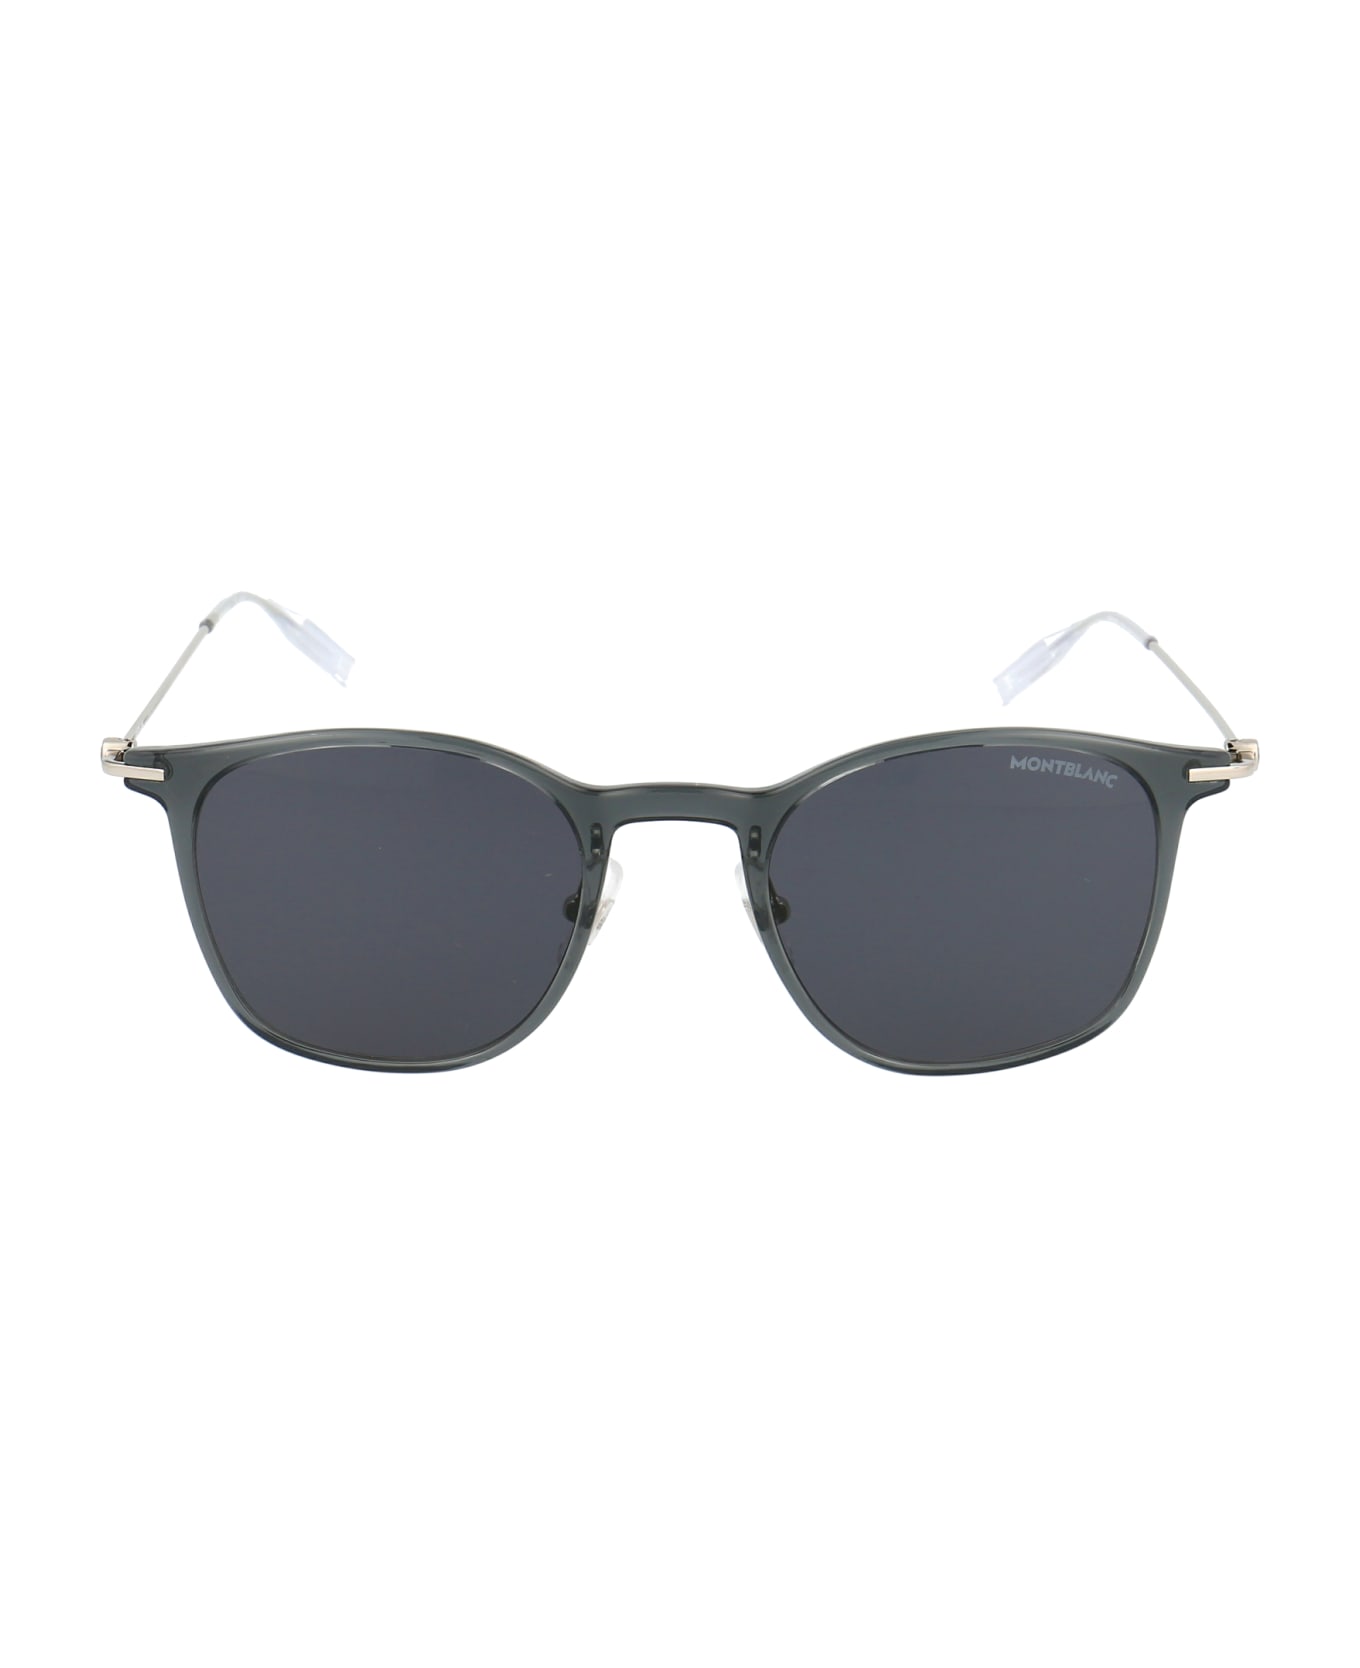 Montblanc Mb0098s Sunglasses - 001 GREY SILVER GREY